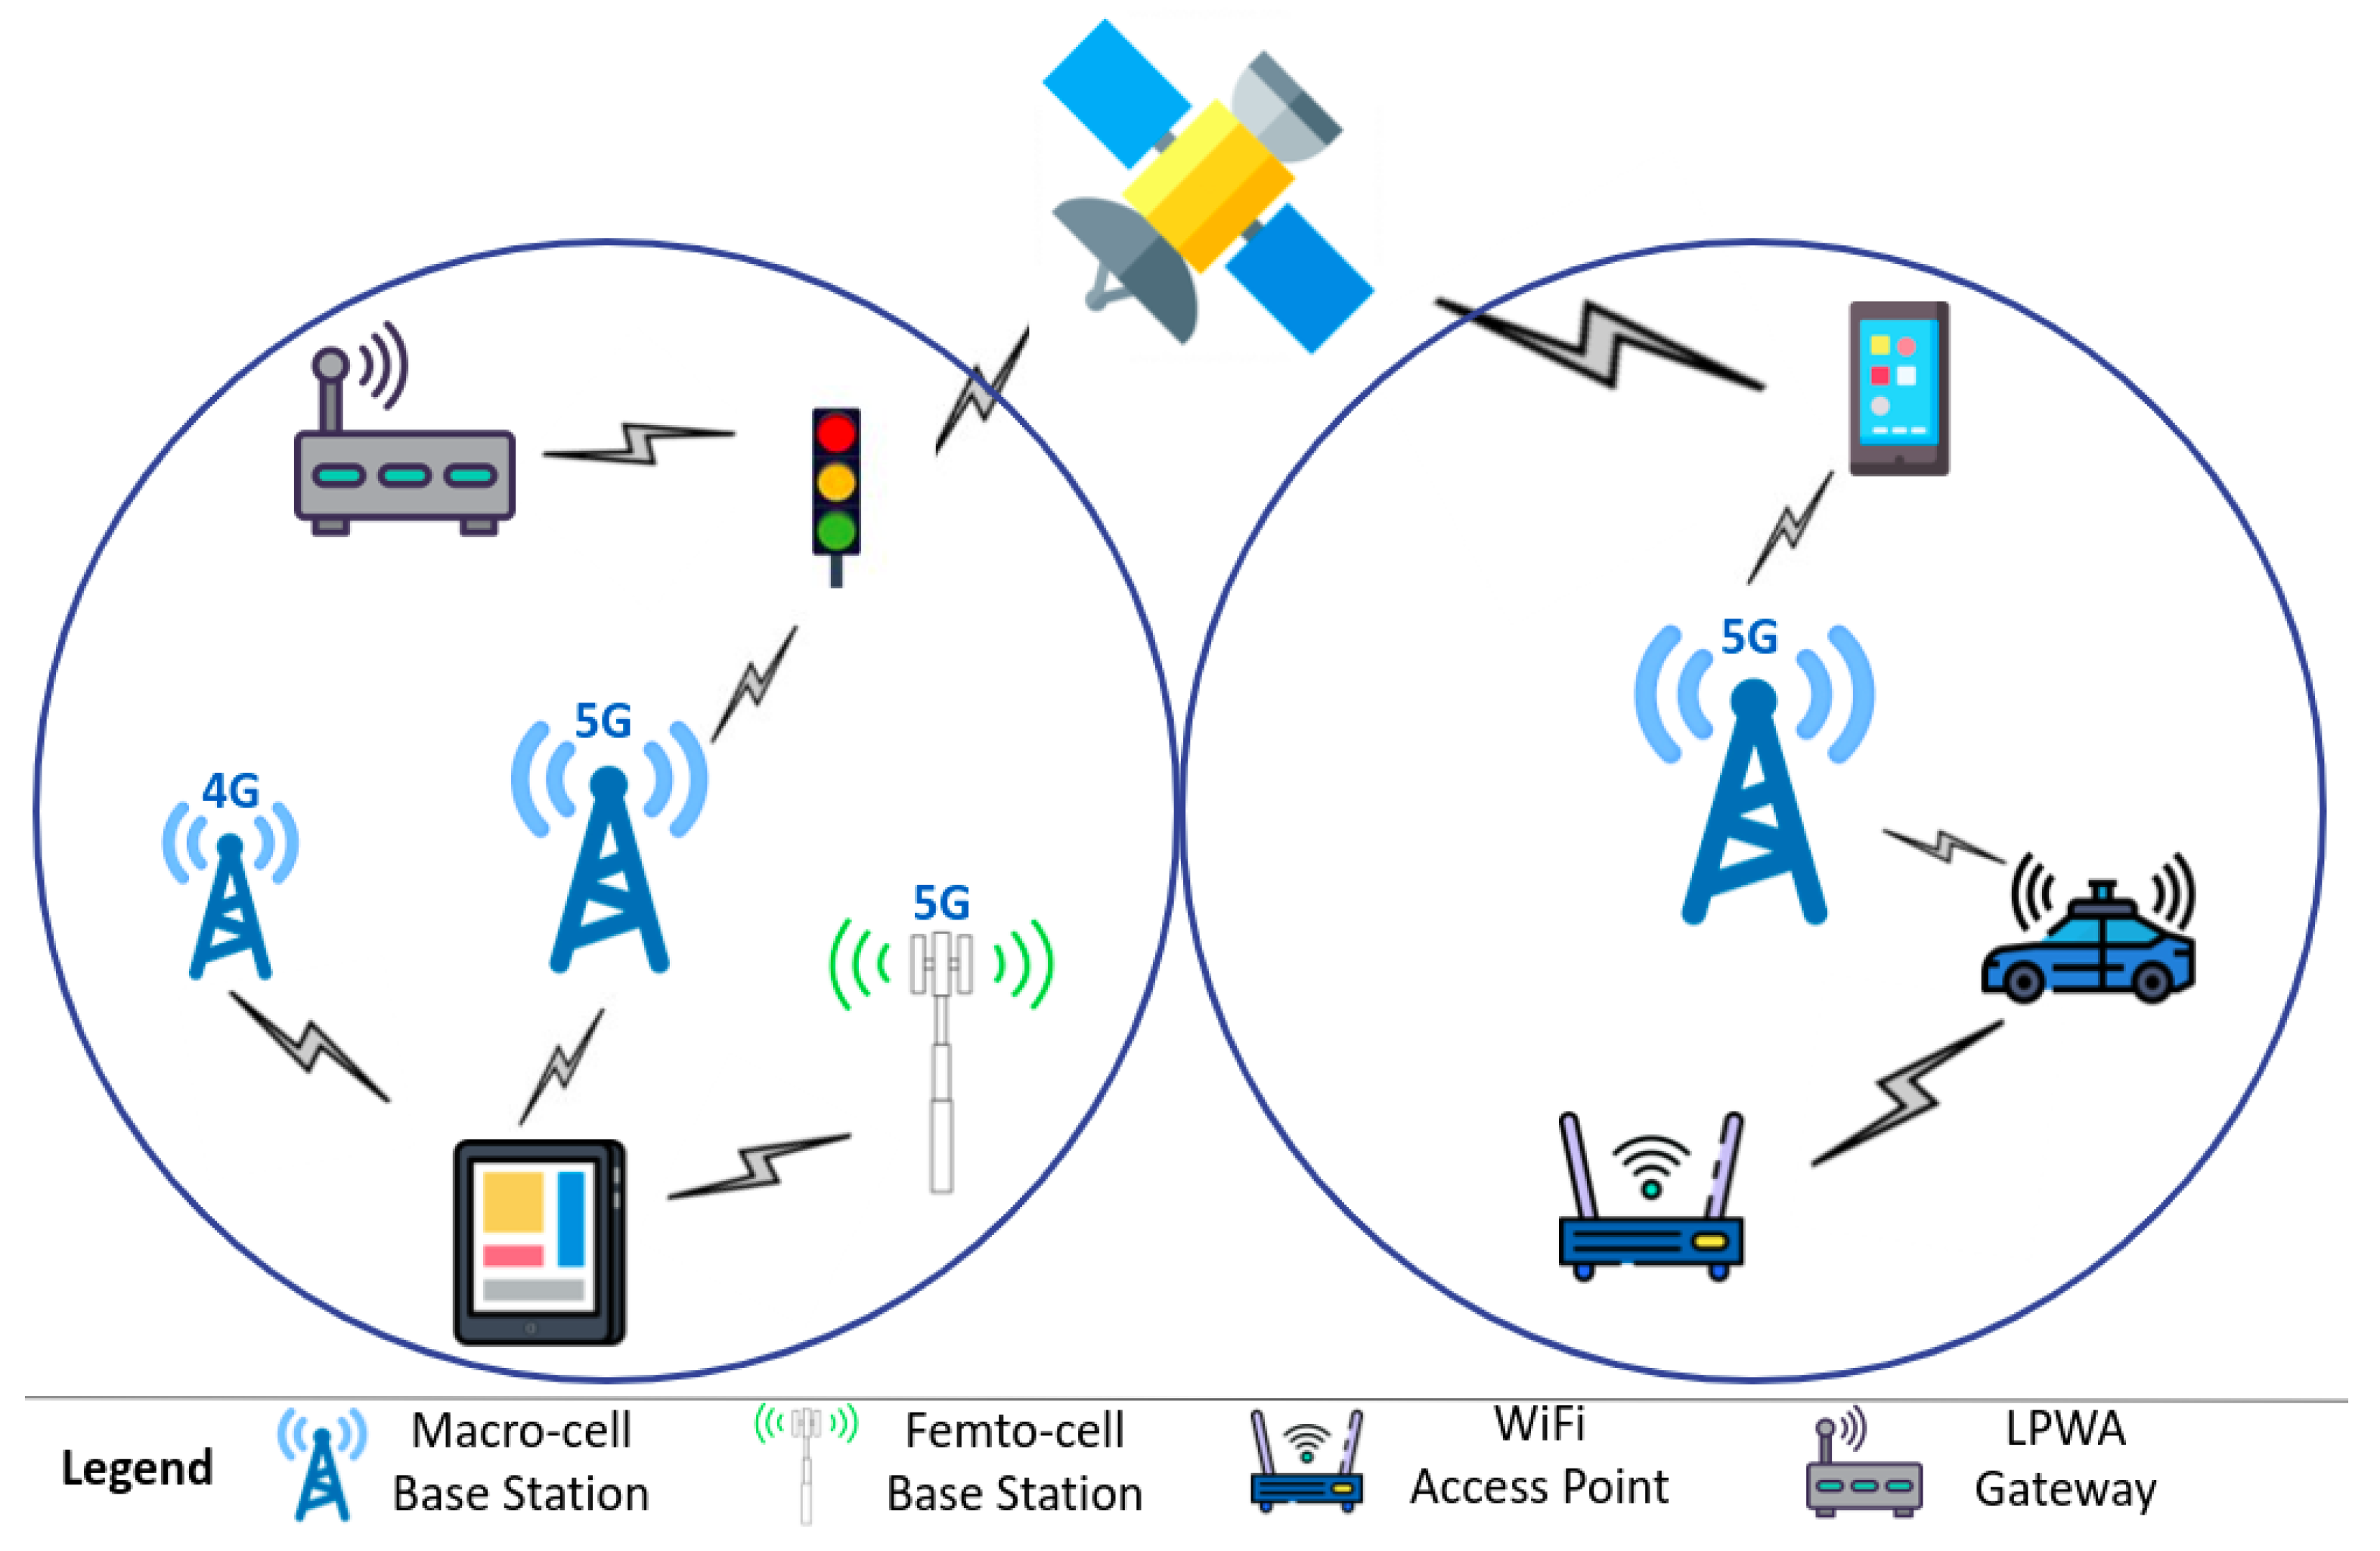 Advanced WiFi Routers Power Spectrum's Converged Connectivity Experience